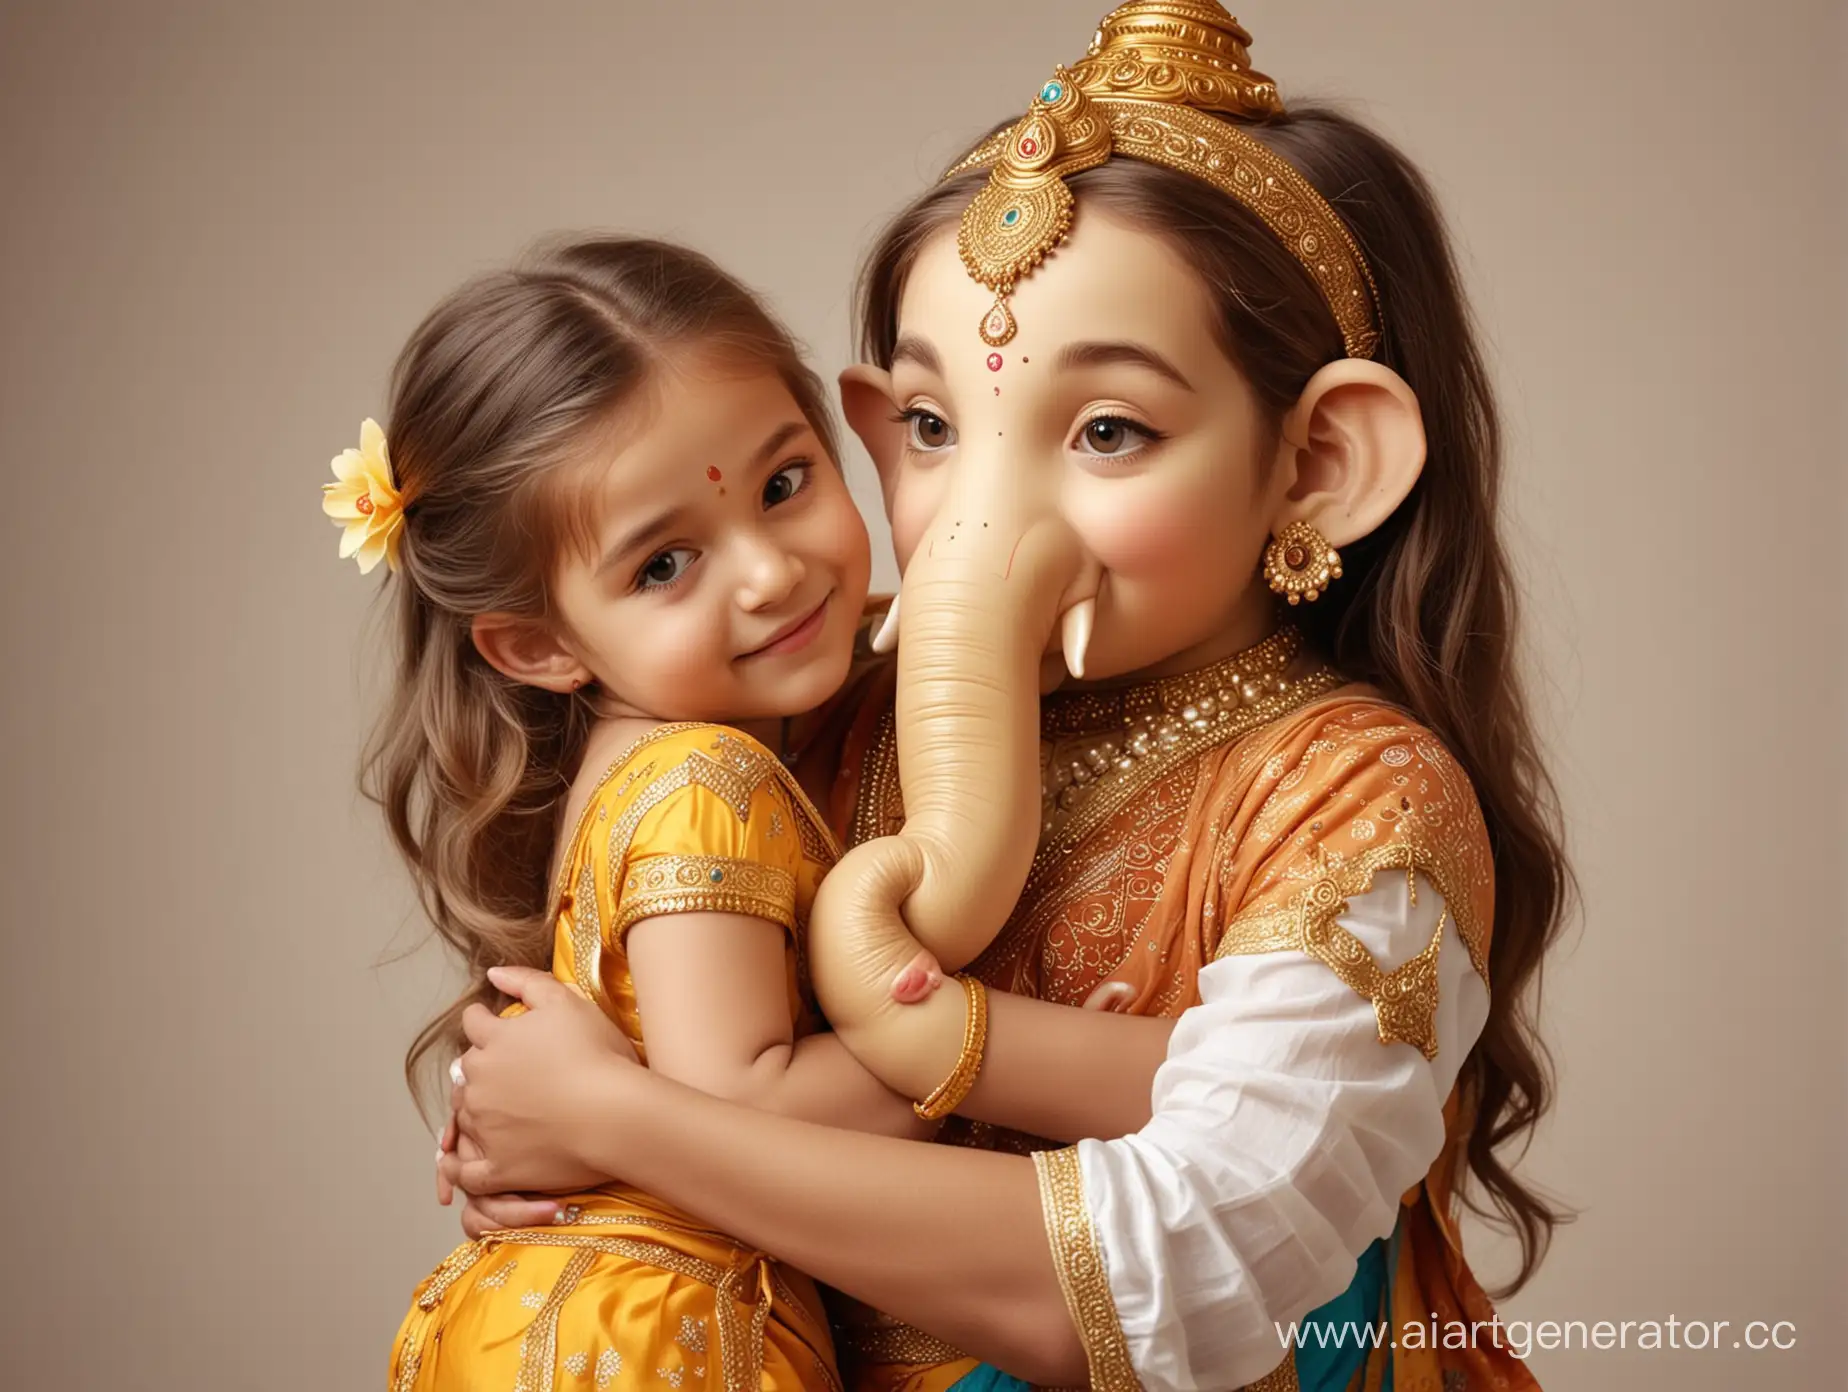 The girl hugs the happy Lord Ganesha from behind. Professional photo 4k